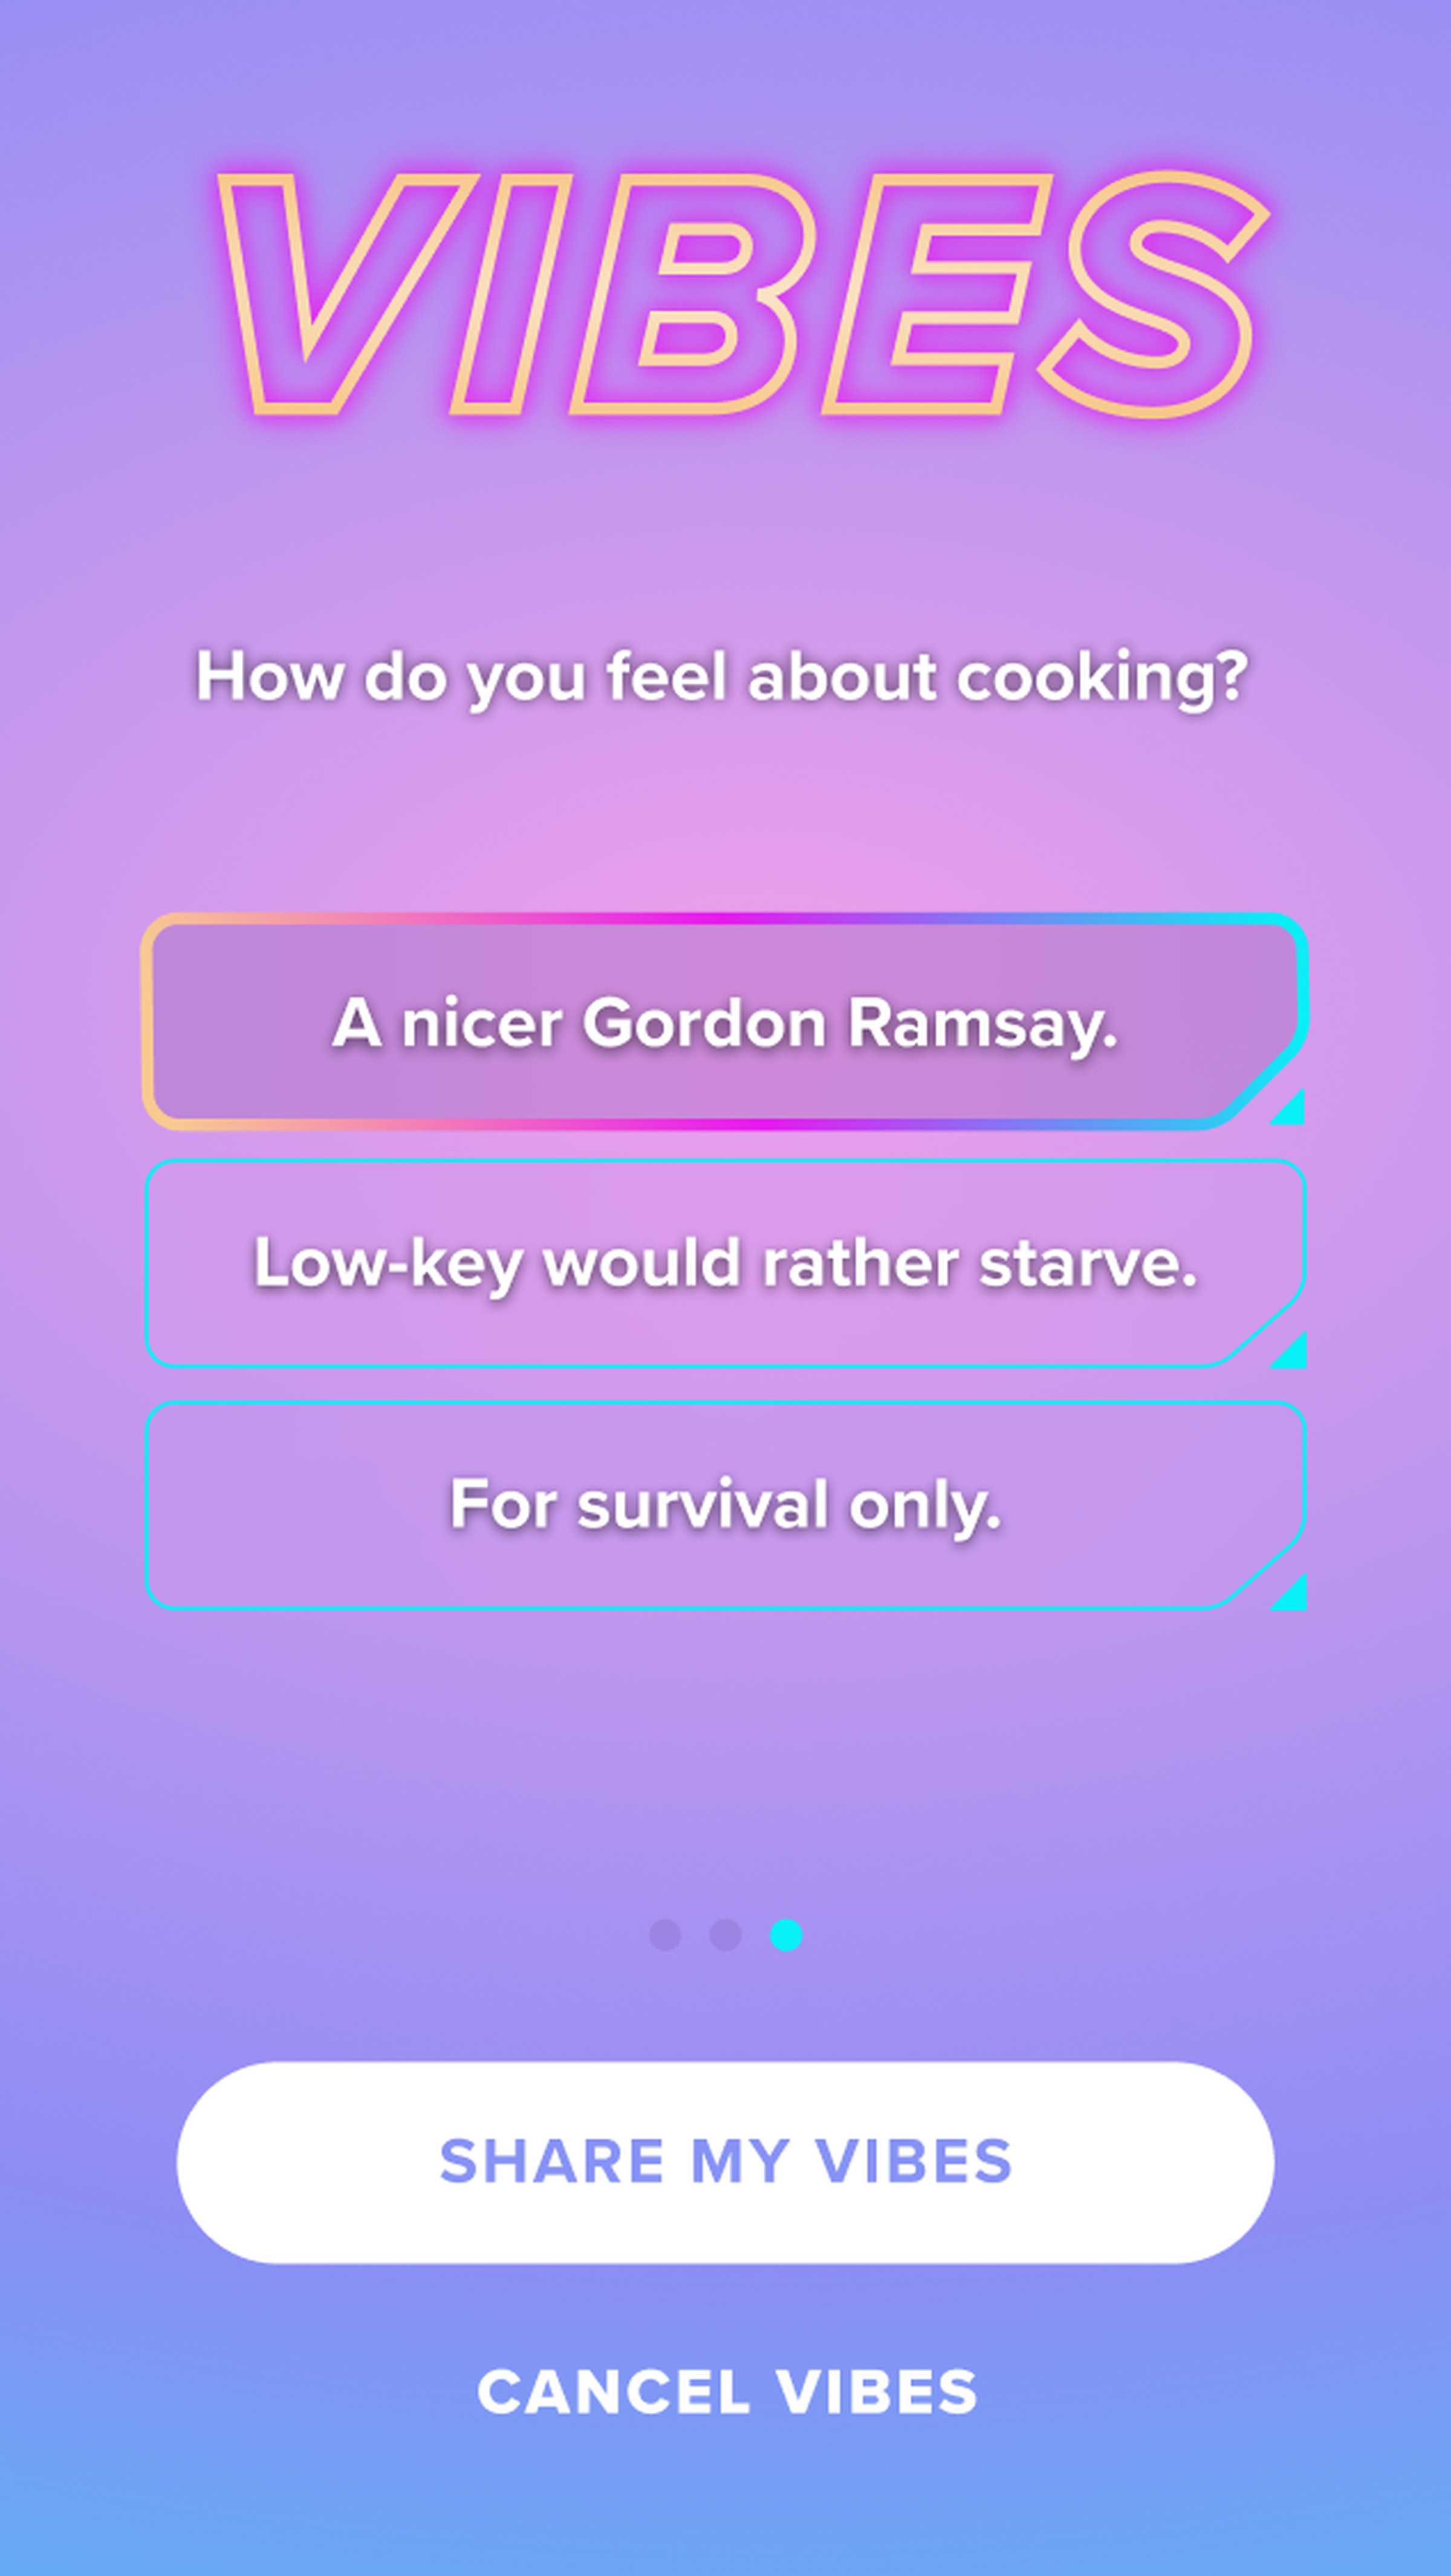 The question asks “How do you feel about cooking?” Answers including three options: “A nicer Gordon Ramsay,” “Low-key would rather starve,” “For survival only.”